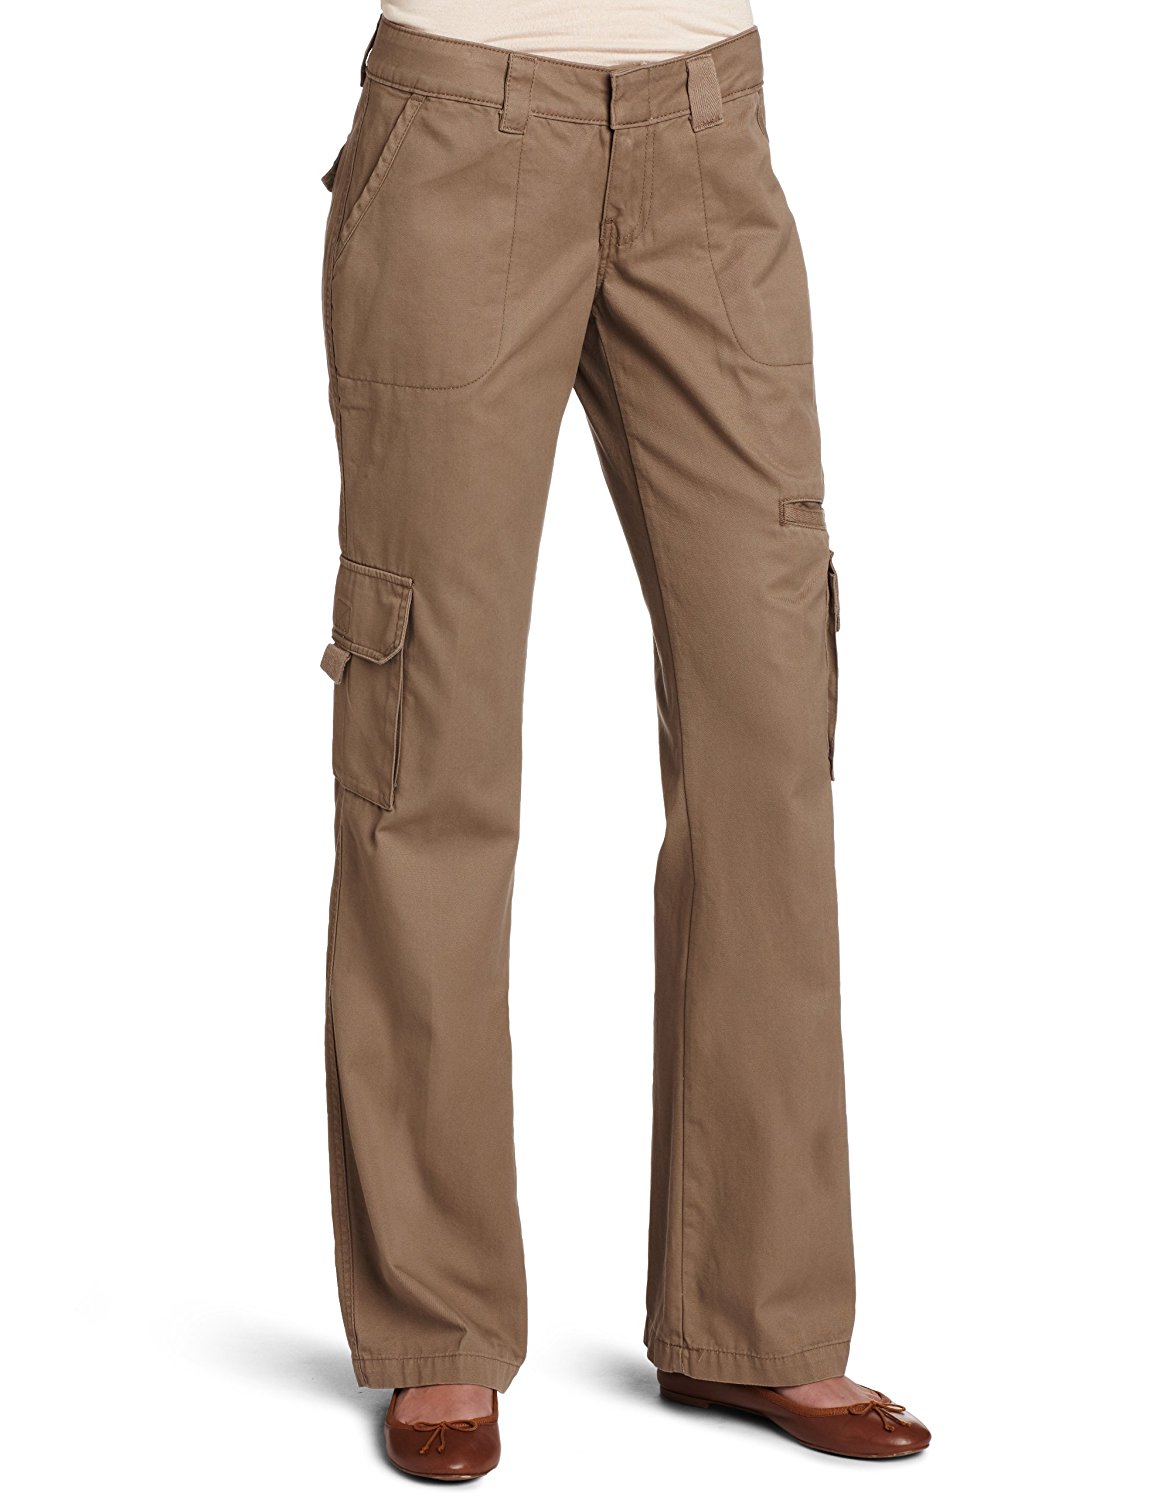 cargo pants for women amazon.com: dickies womenu0027s relaxed fit straight leg cargo pant: clothing onsqxfu